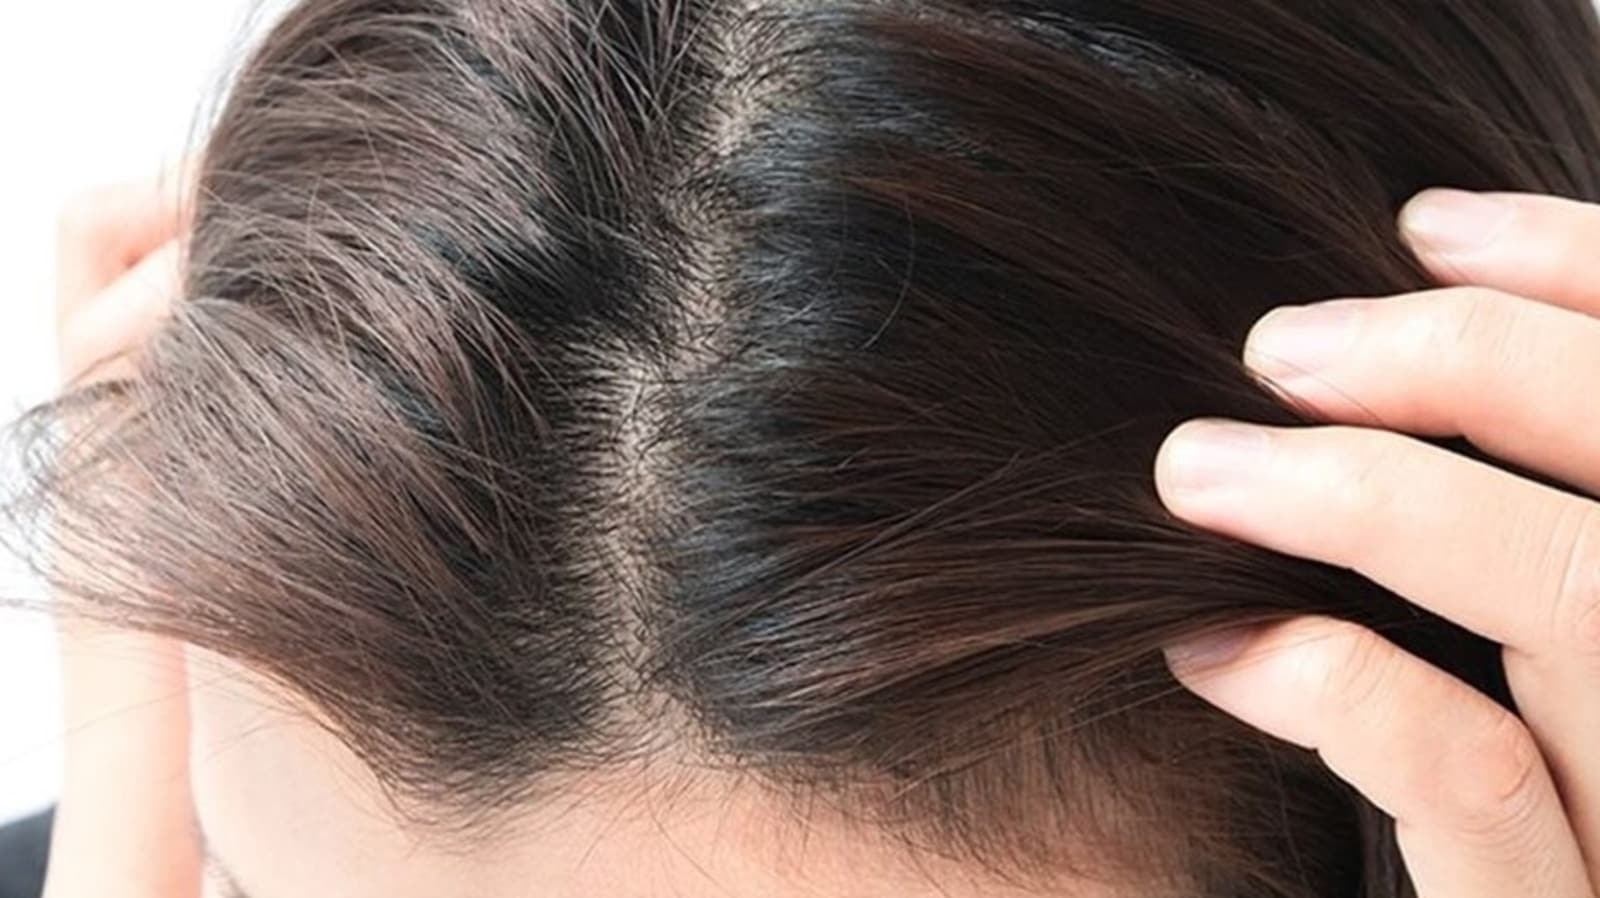 Heres How to Treat Pimples on Scalp Home Remedies Causes and Prevention